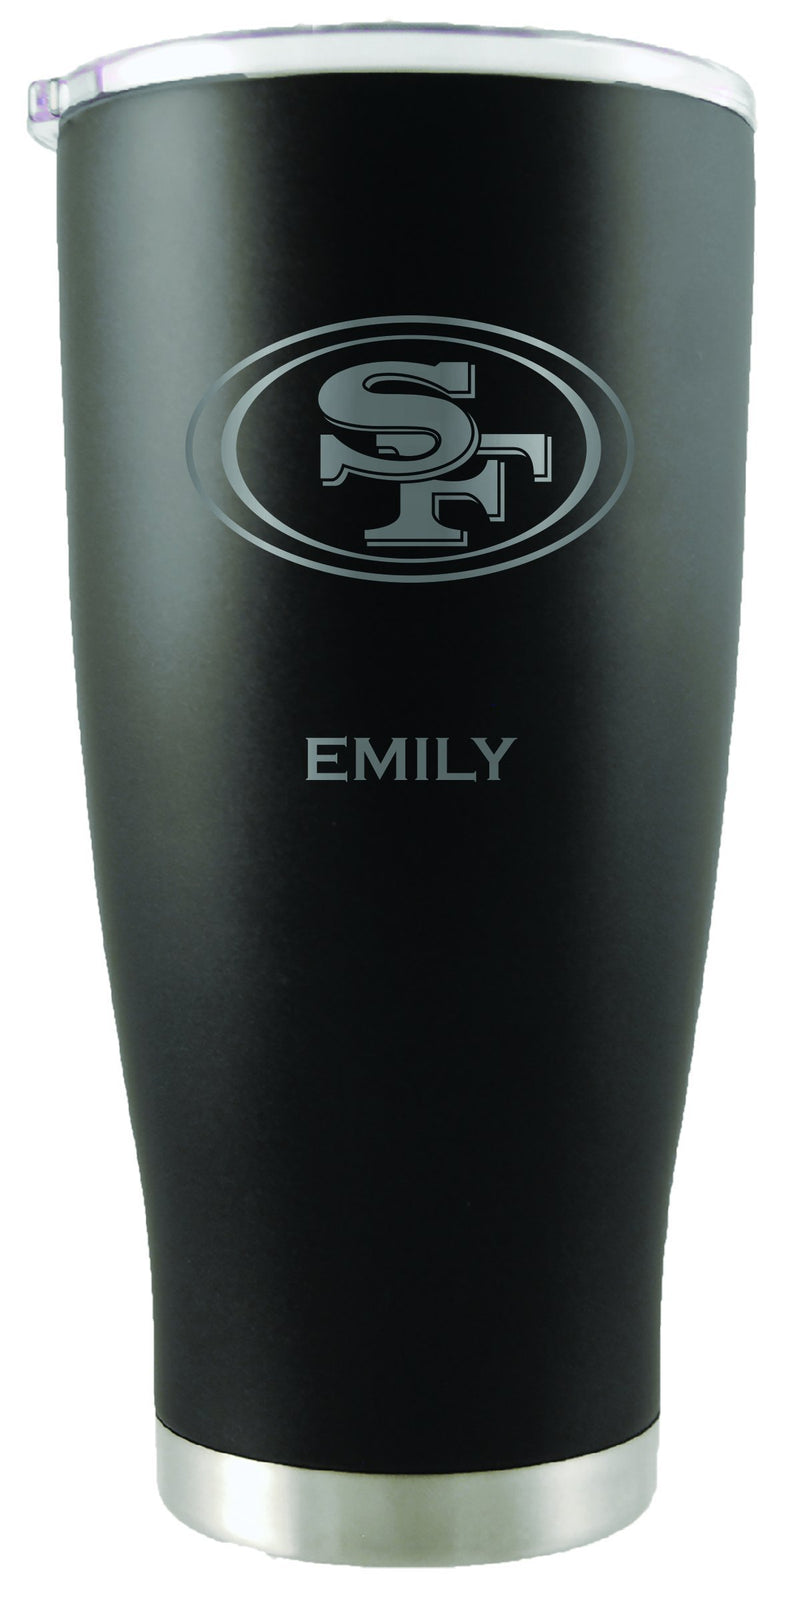 20oz Black Personalized Stainless Steel Tumbler | San Francisco 49ers
CurrentProduct, Drinkware_category_All, NFL, Personalized_Personalized, San Francisco 49ers, SFF, Stainless Steel
The Memory Company